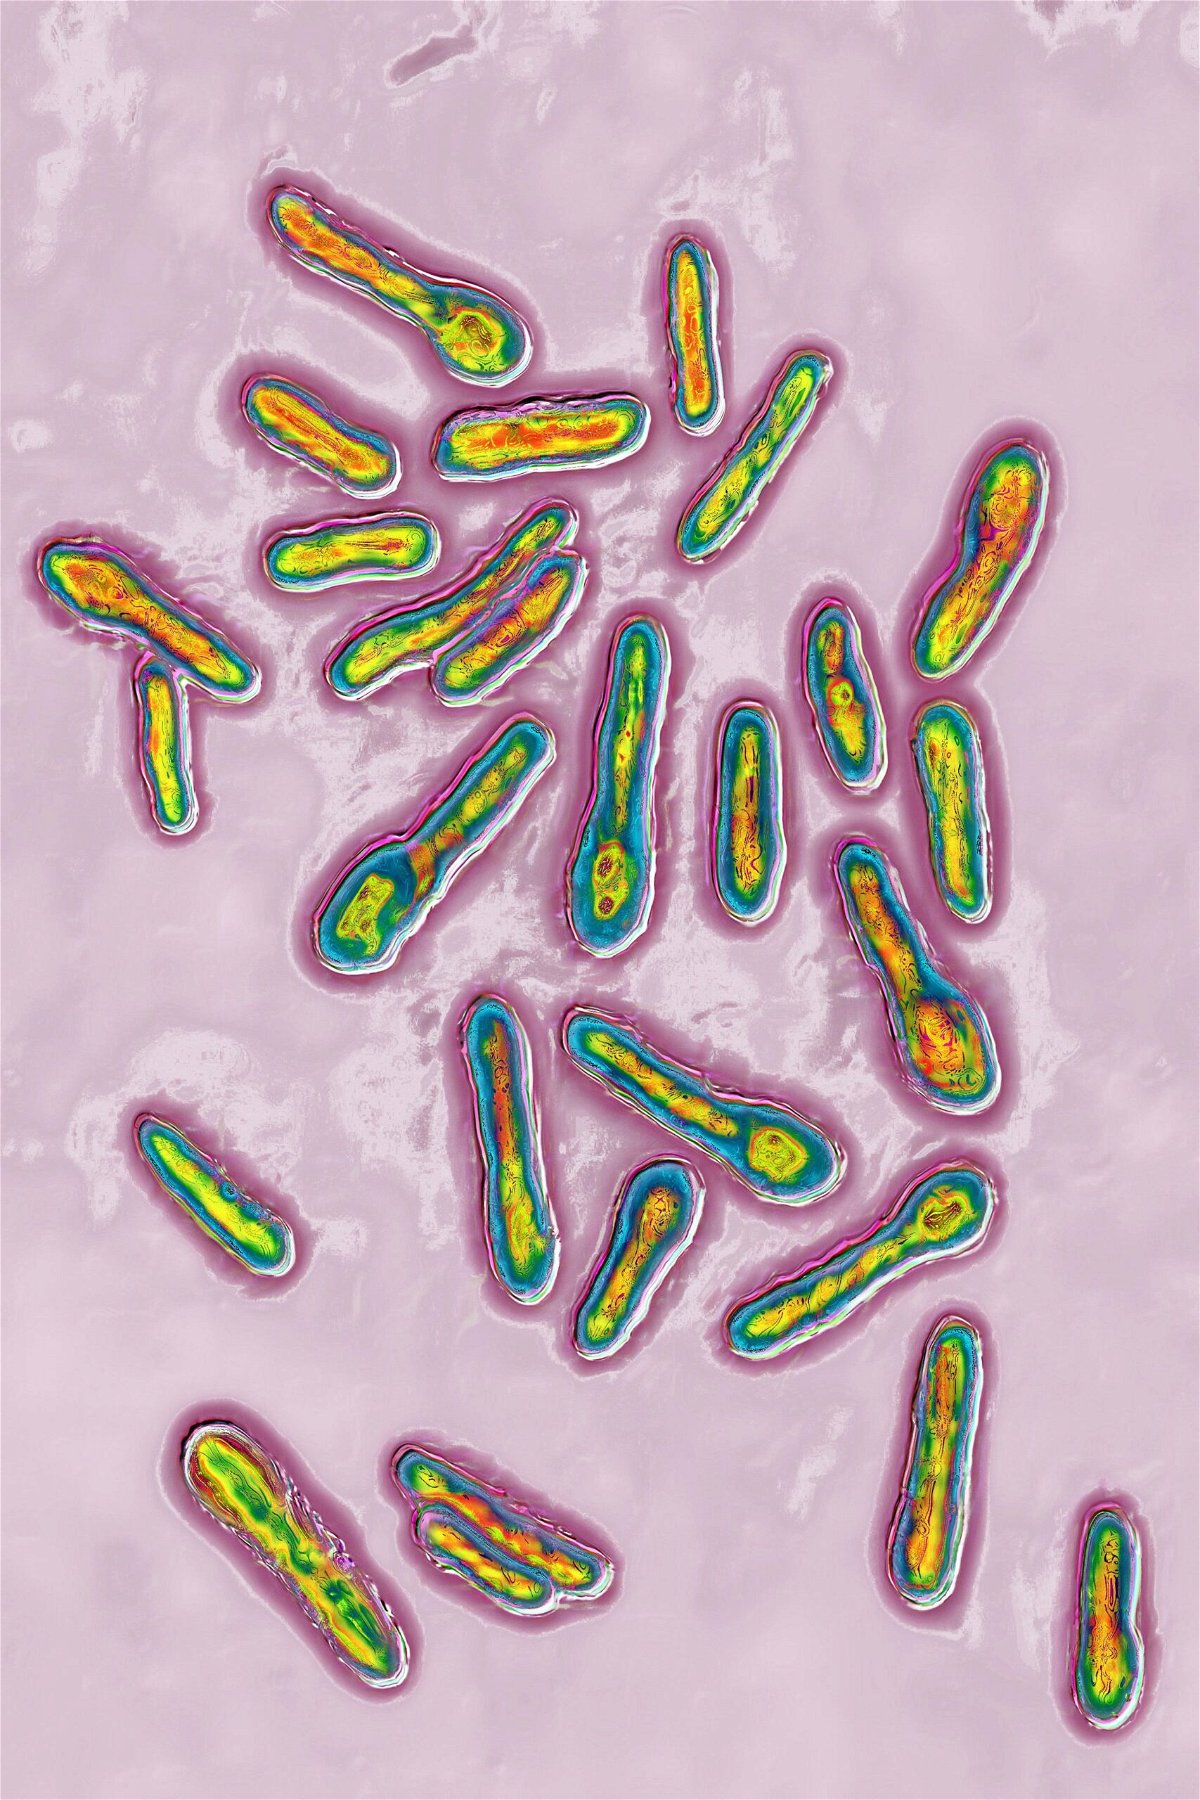 An image produced using optical microscopy shows Clostridium botulinum, an ingredient in Botox and similar cosmetic substances. The purified form of the botulinum toxin is approved by the FDA for use by licensed healthcare providers as a cosmetic treatment.